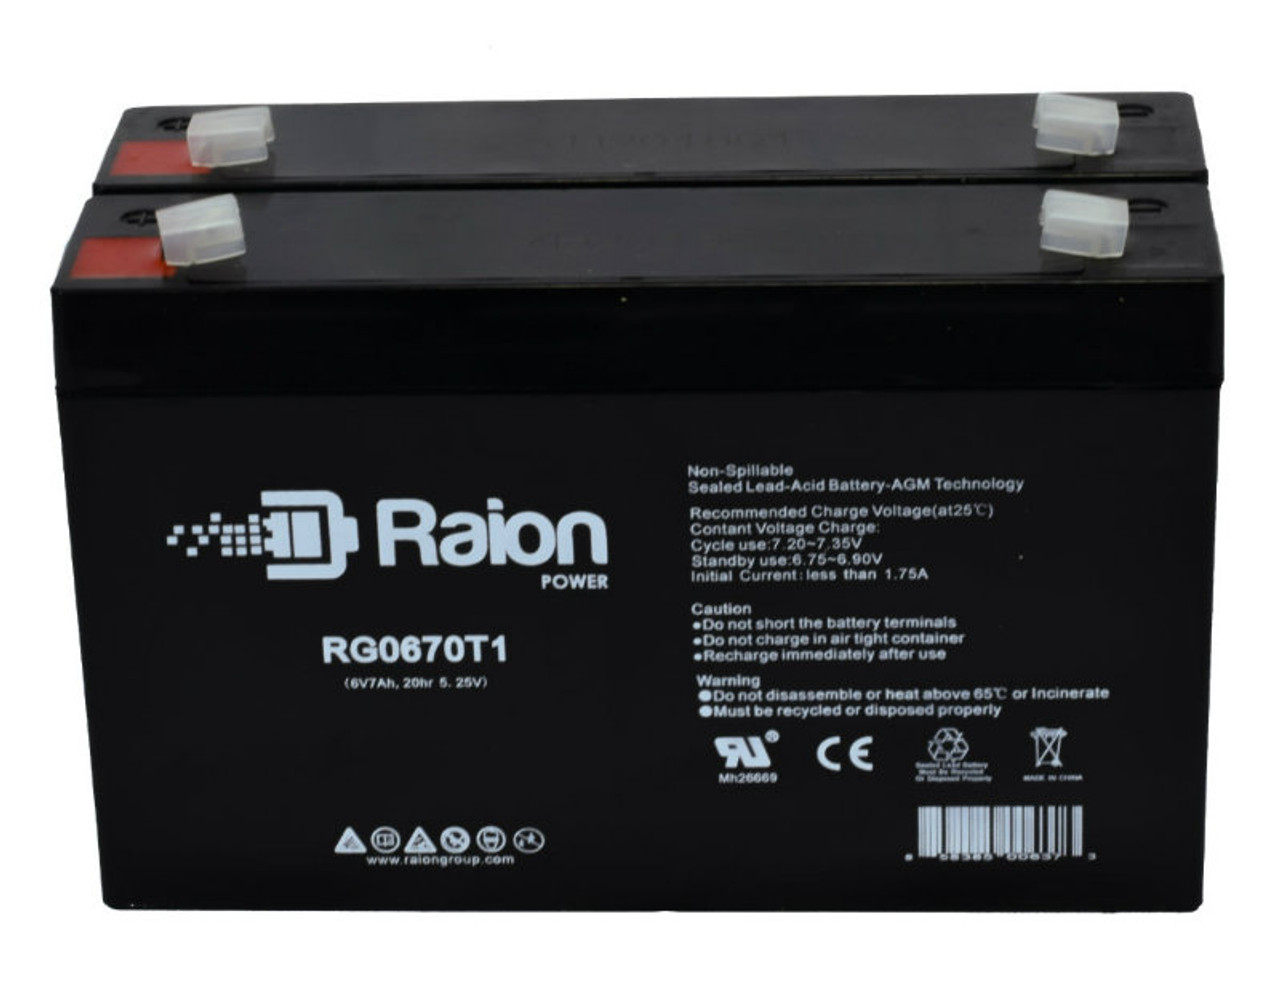 Raion Power RG0670T1 6V 7Ah Replacement Emergency Light Battery for Power Rite PRB67 - 2 Pack